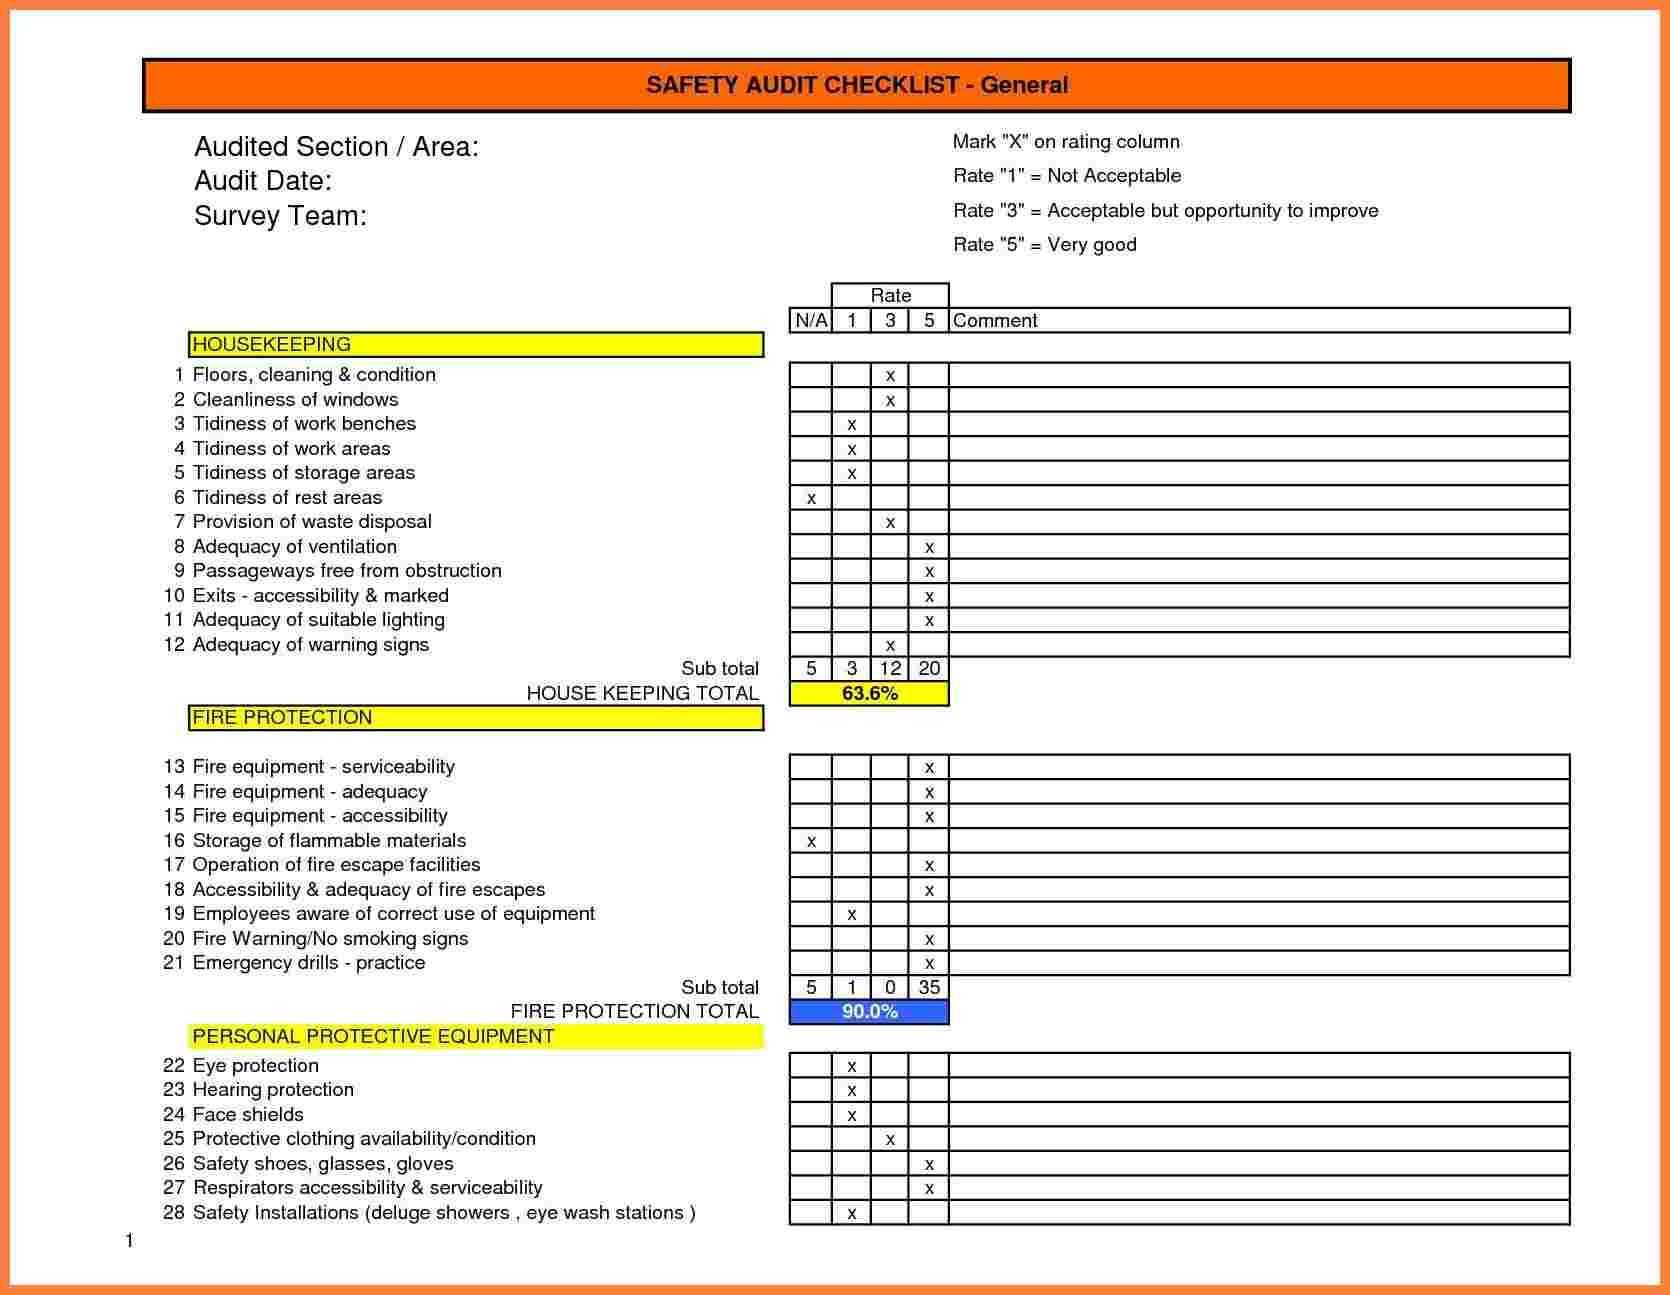 Image Result For Warehouse Health And Safety Audit Form Pertaining To Safety Analysis Report Template